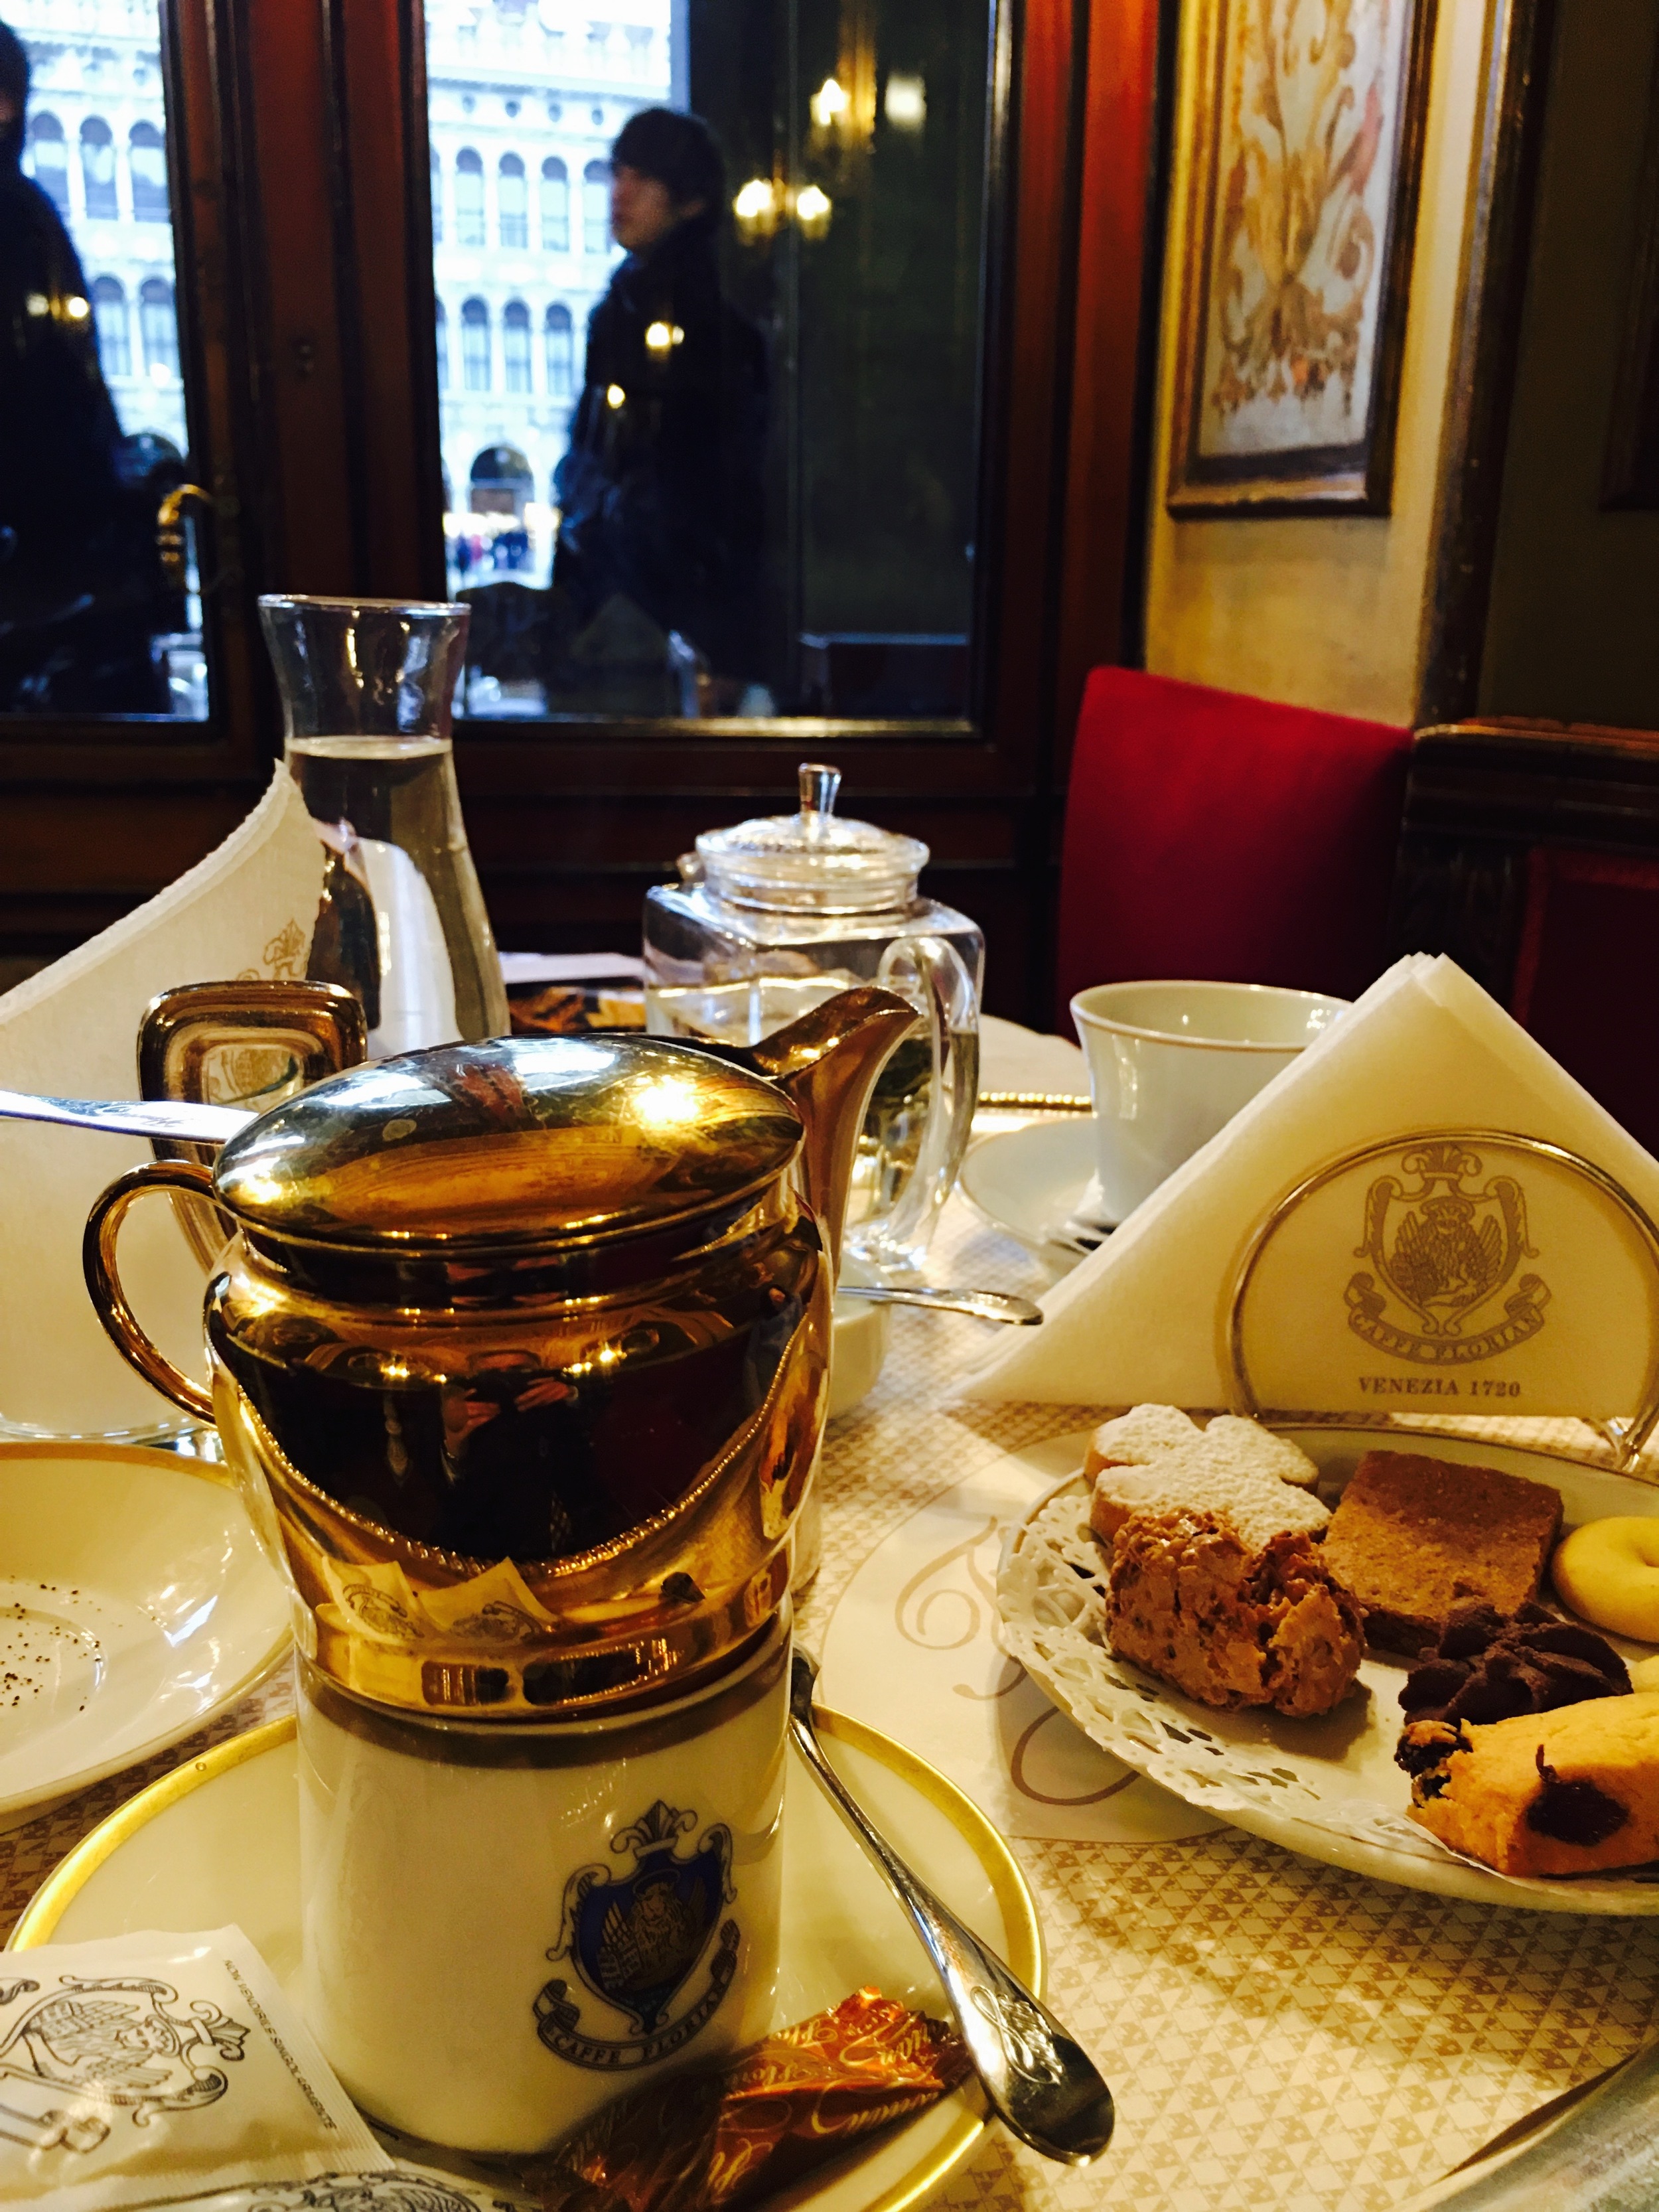  Gloriously expensive coffees and biscuits at the Cafe Florian. I humbly submit the idea that history can be made wherever you are; assuming you are capable of it. Momentous acts don’t need the angel dust of history to anoint it. That aside, the food